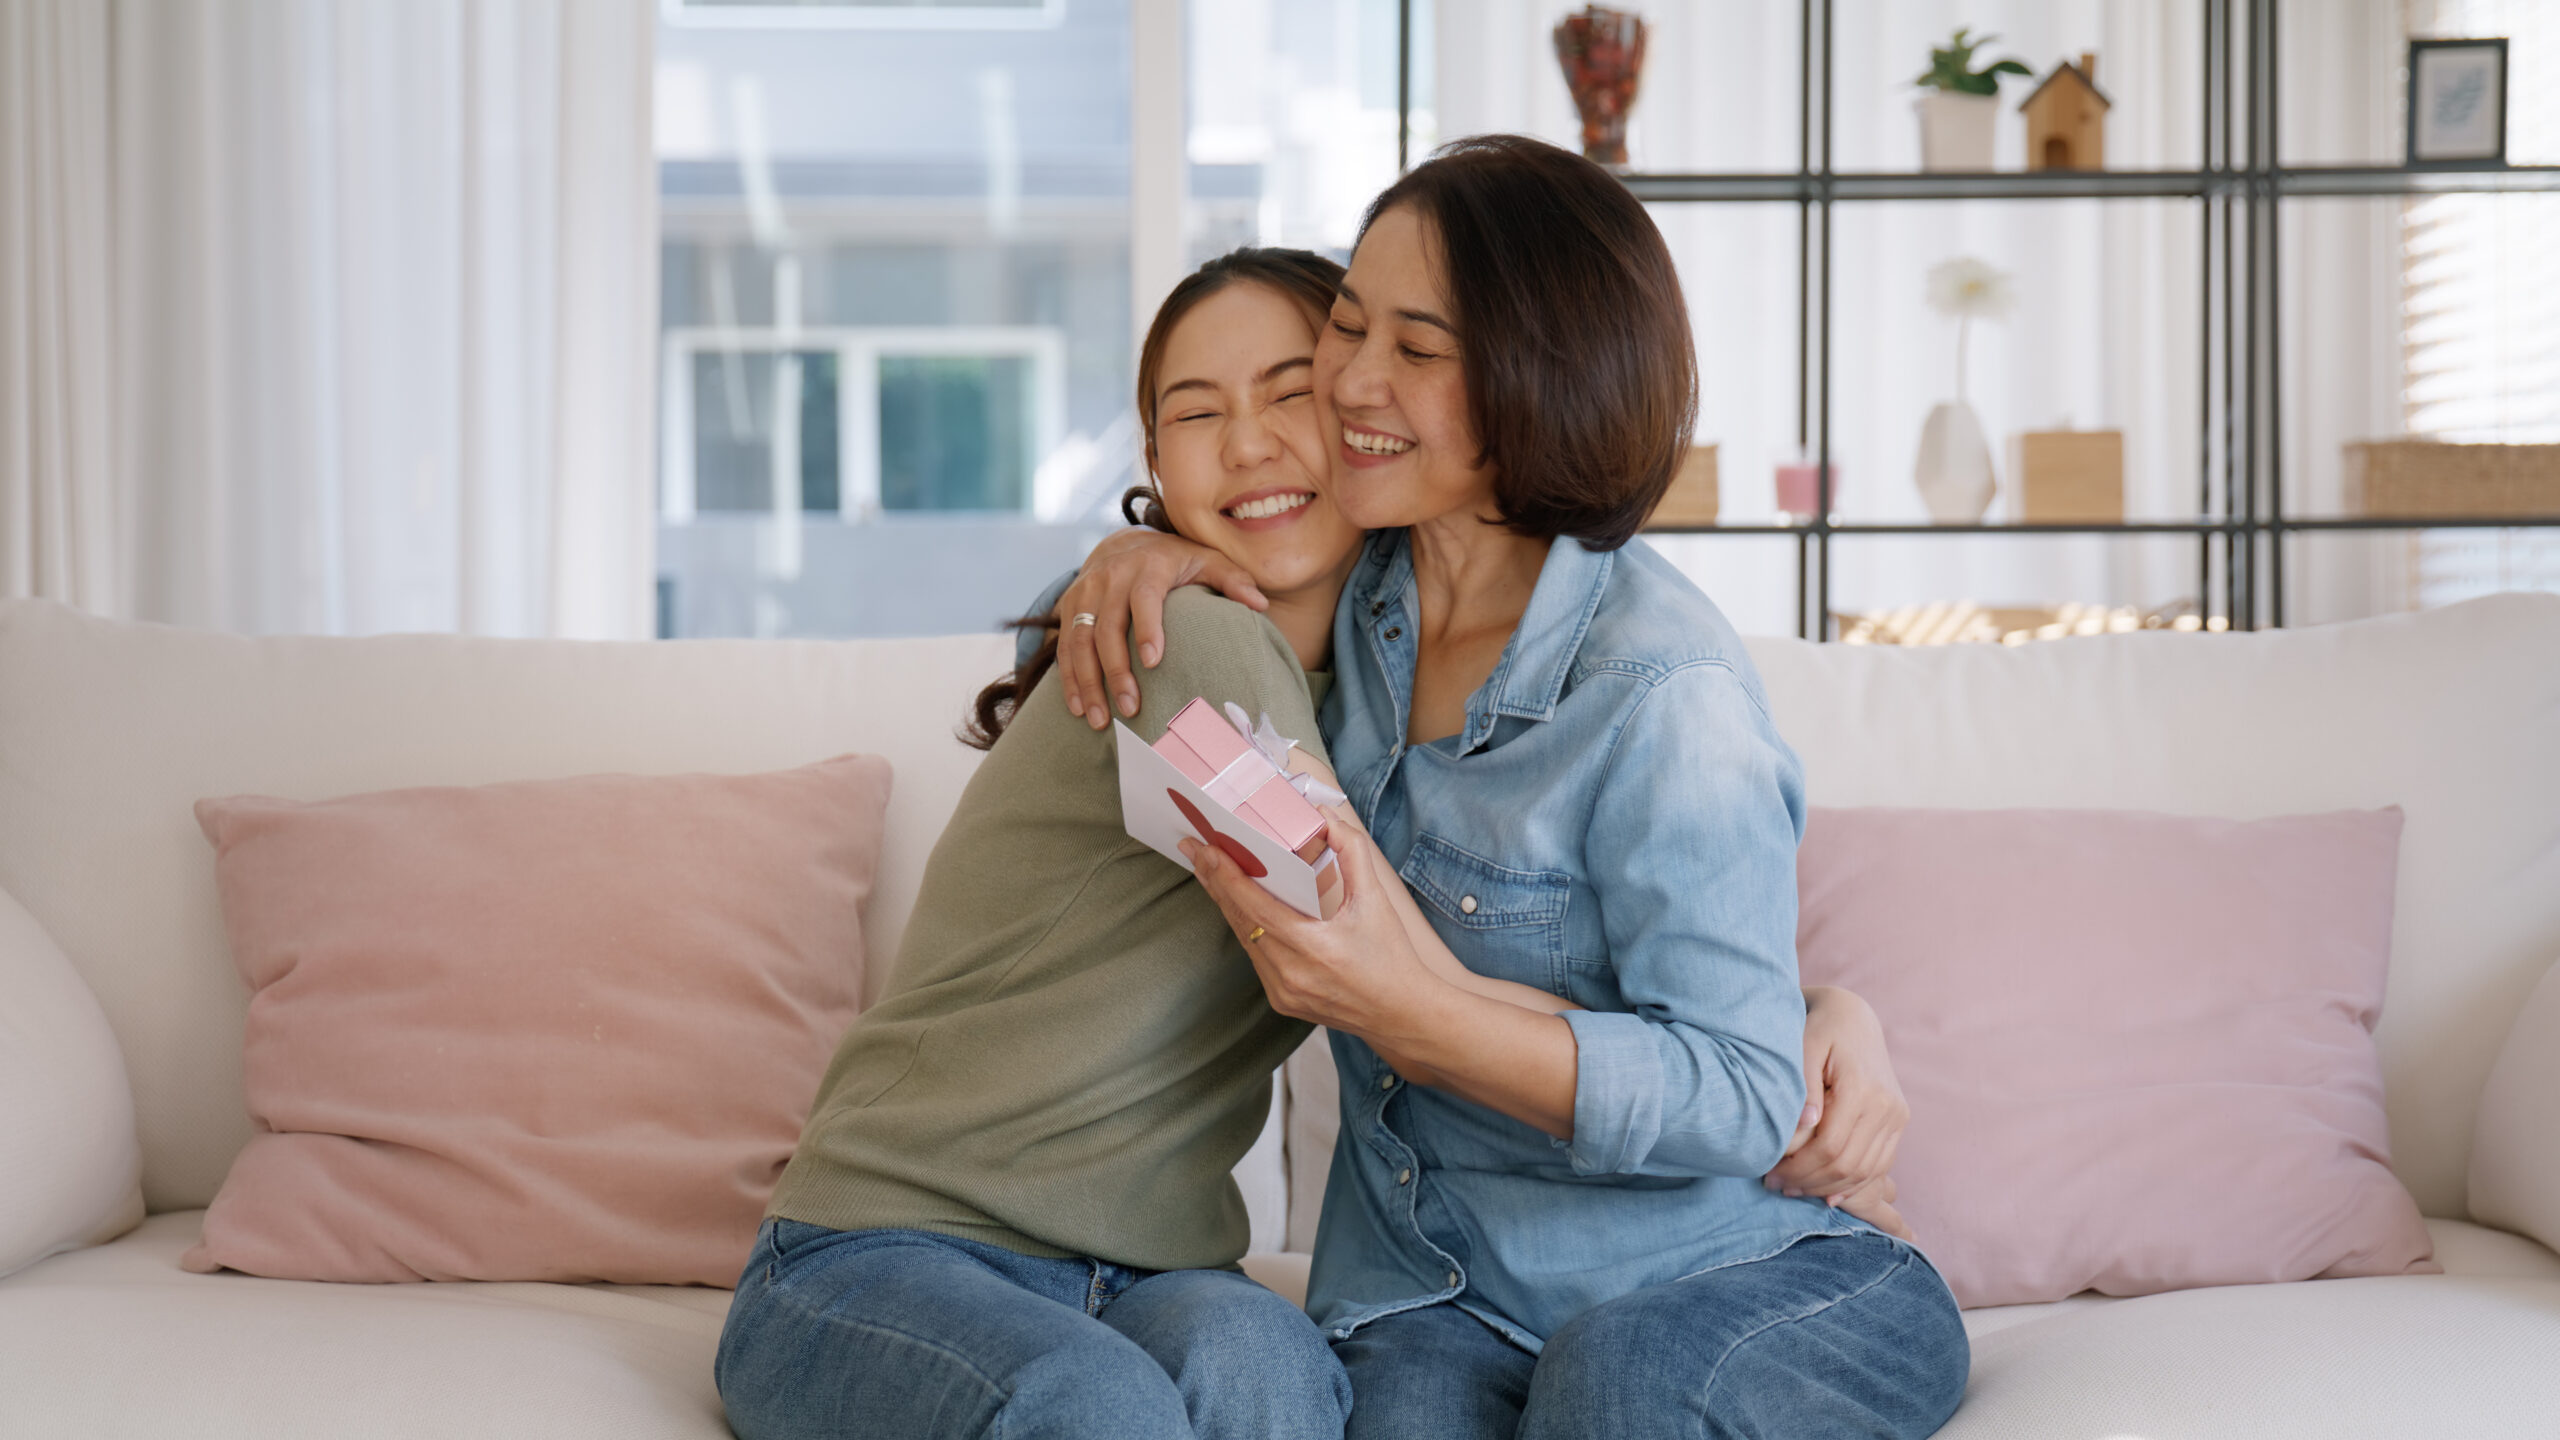 Stock image of a mother and daughter